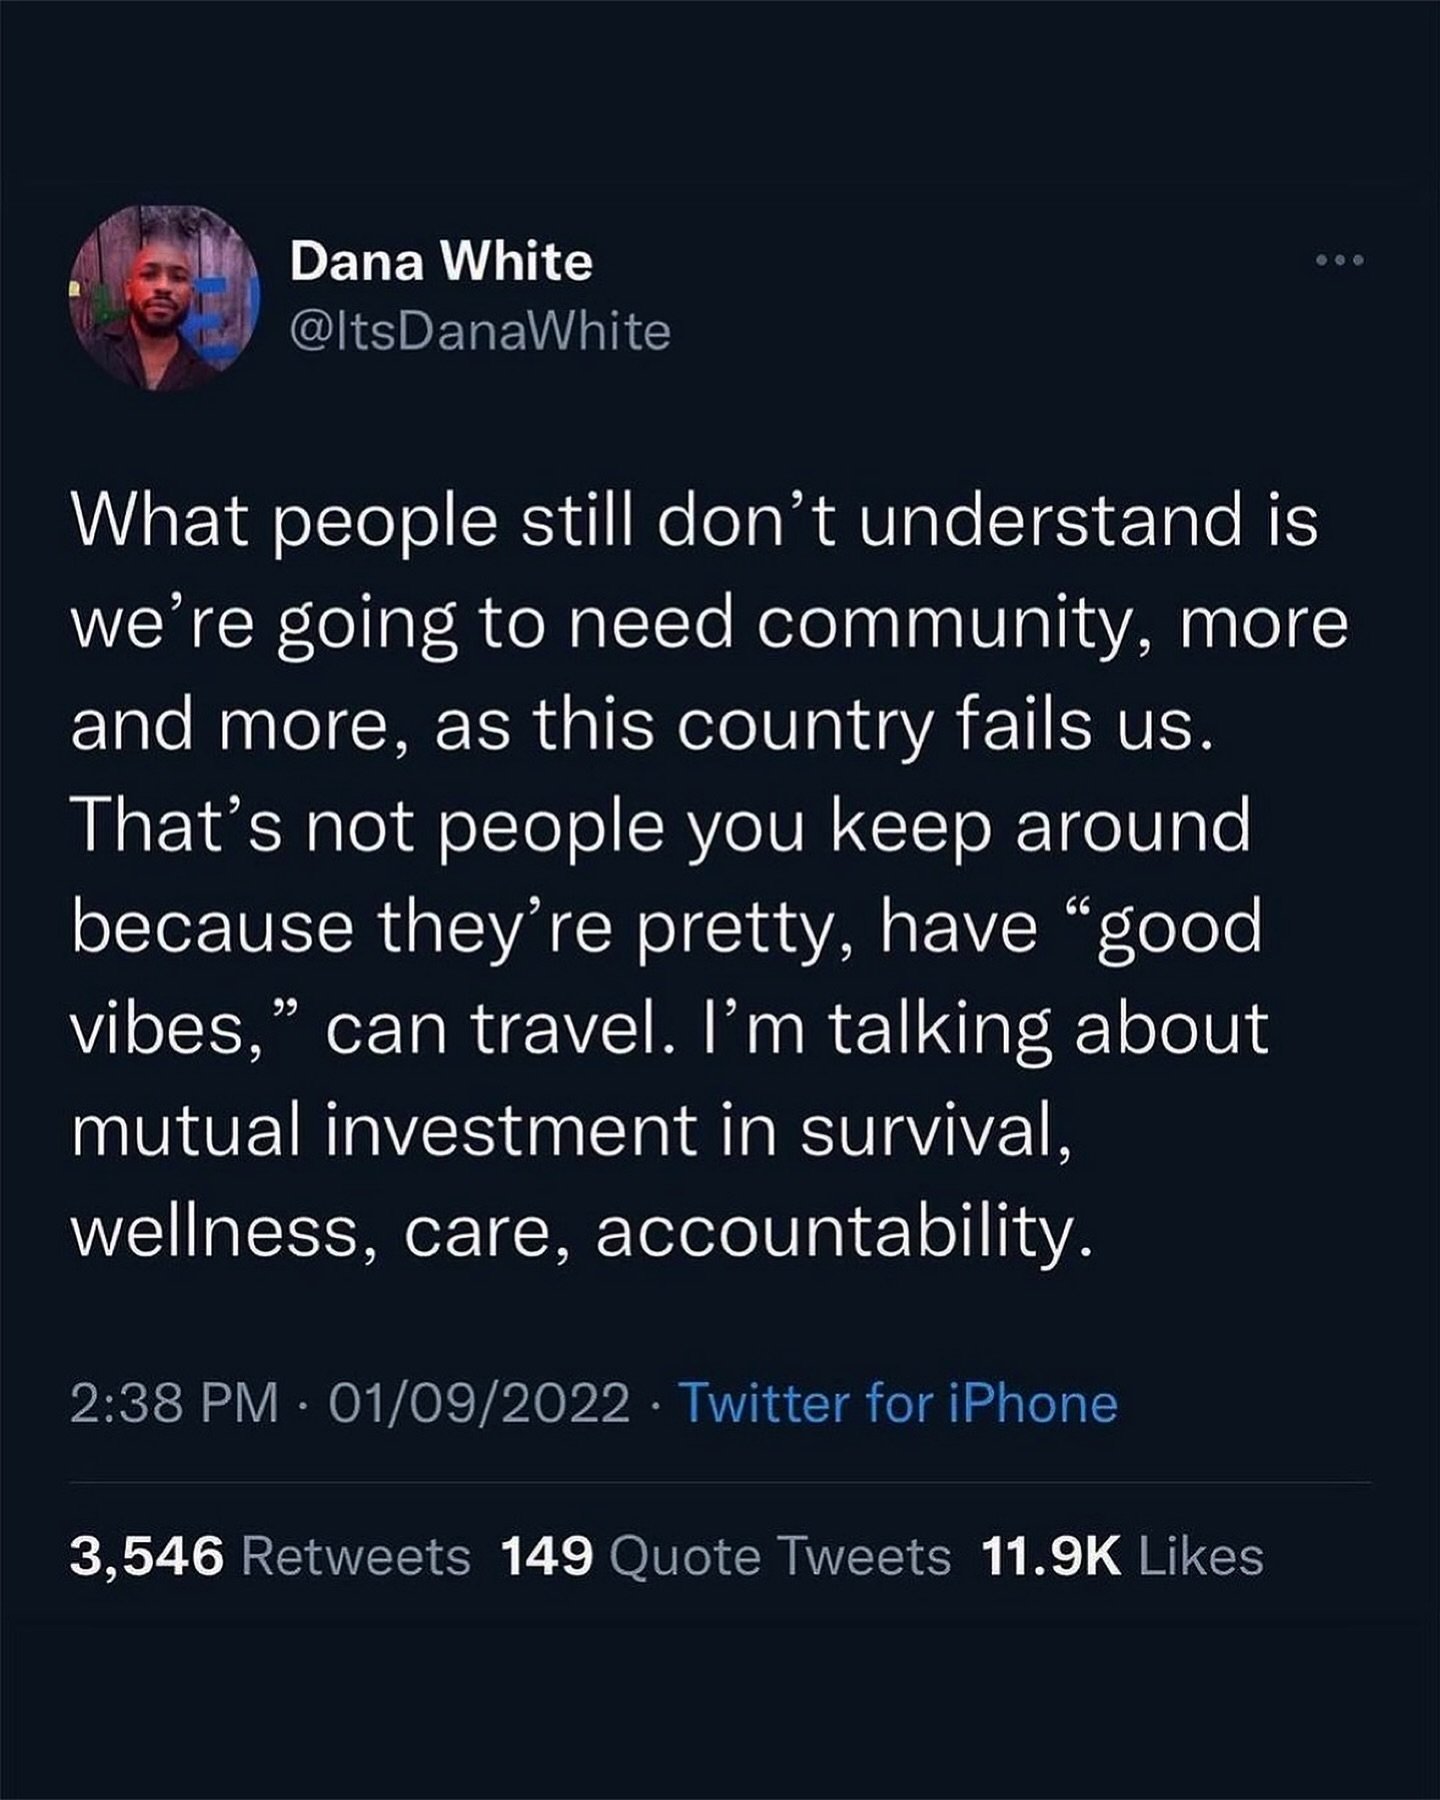 Amplifying Voices: Community &amp; Mutual Aid

This reminder from @itsdanawhite may be more important than ever #collectivethoughts #collectiveconsciousness ❤️

______

#intergenerationaltrauma #complextrauma #trauma #traumainformed #traumahealing #a